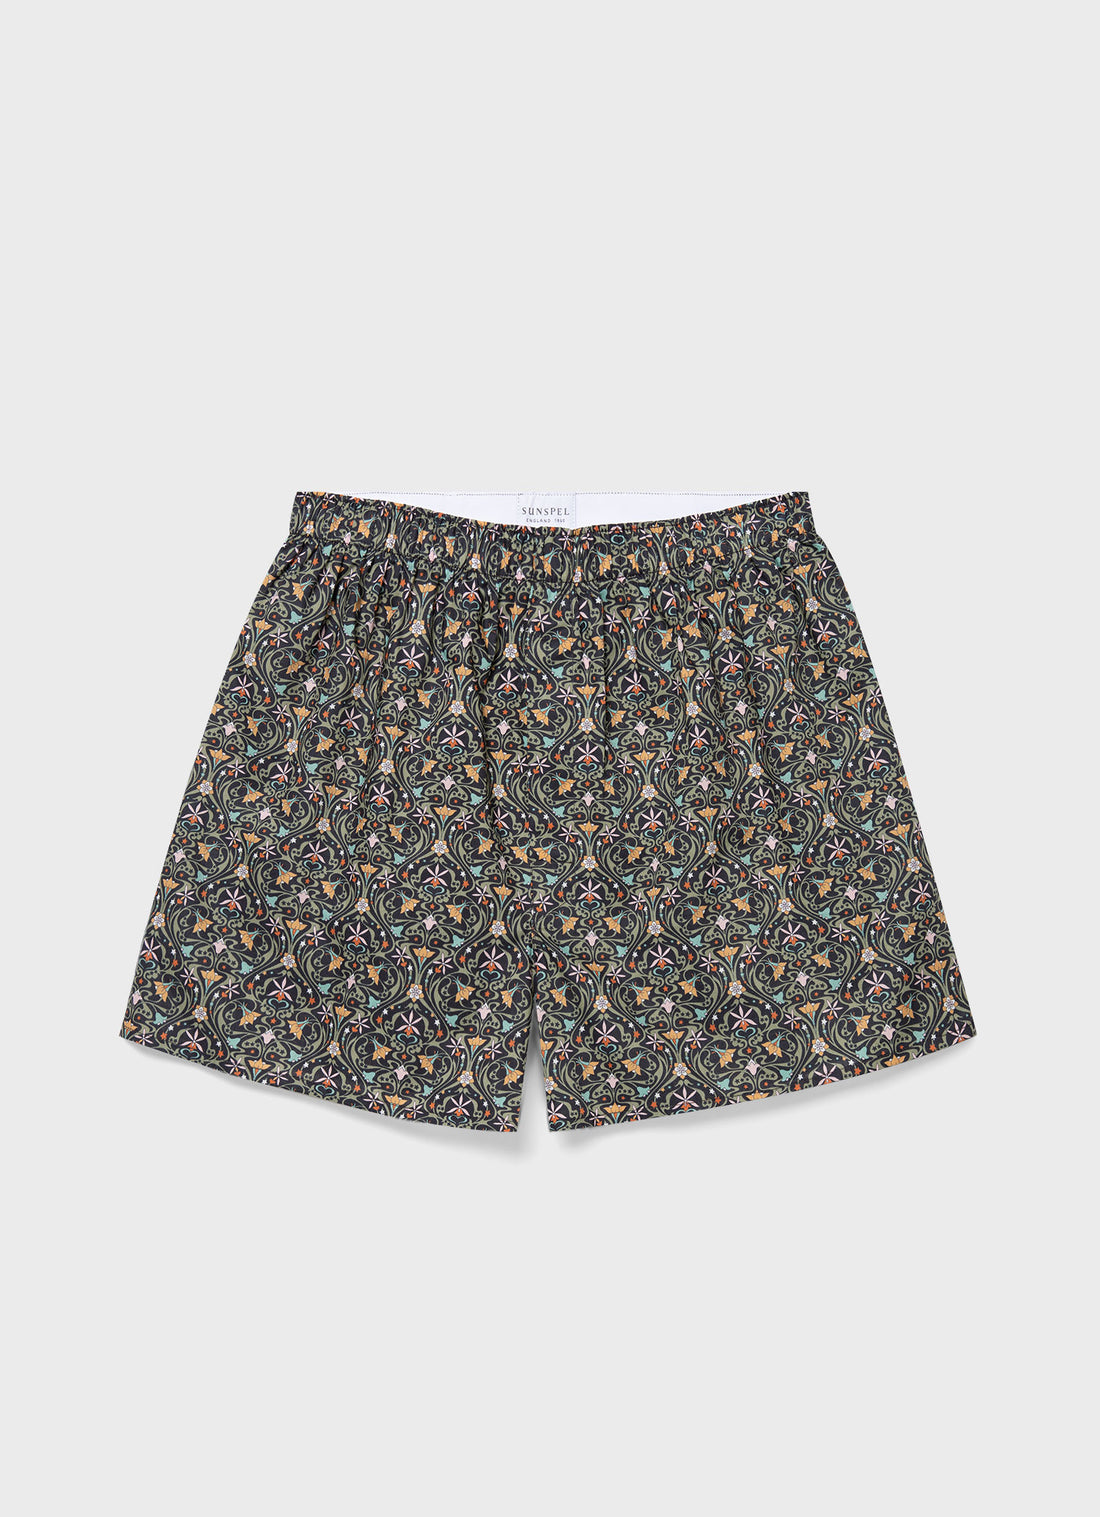 Men's Classic Boxer Shorts in Liberty Fabric in Ghost Orchid